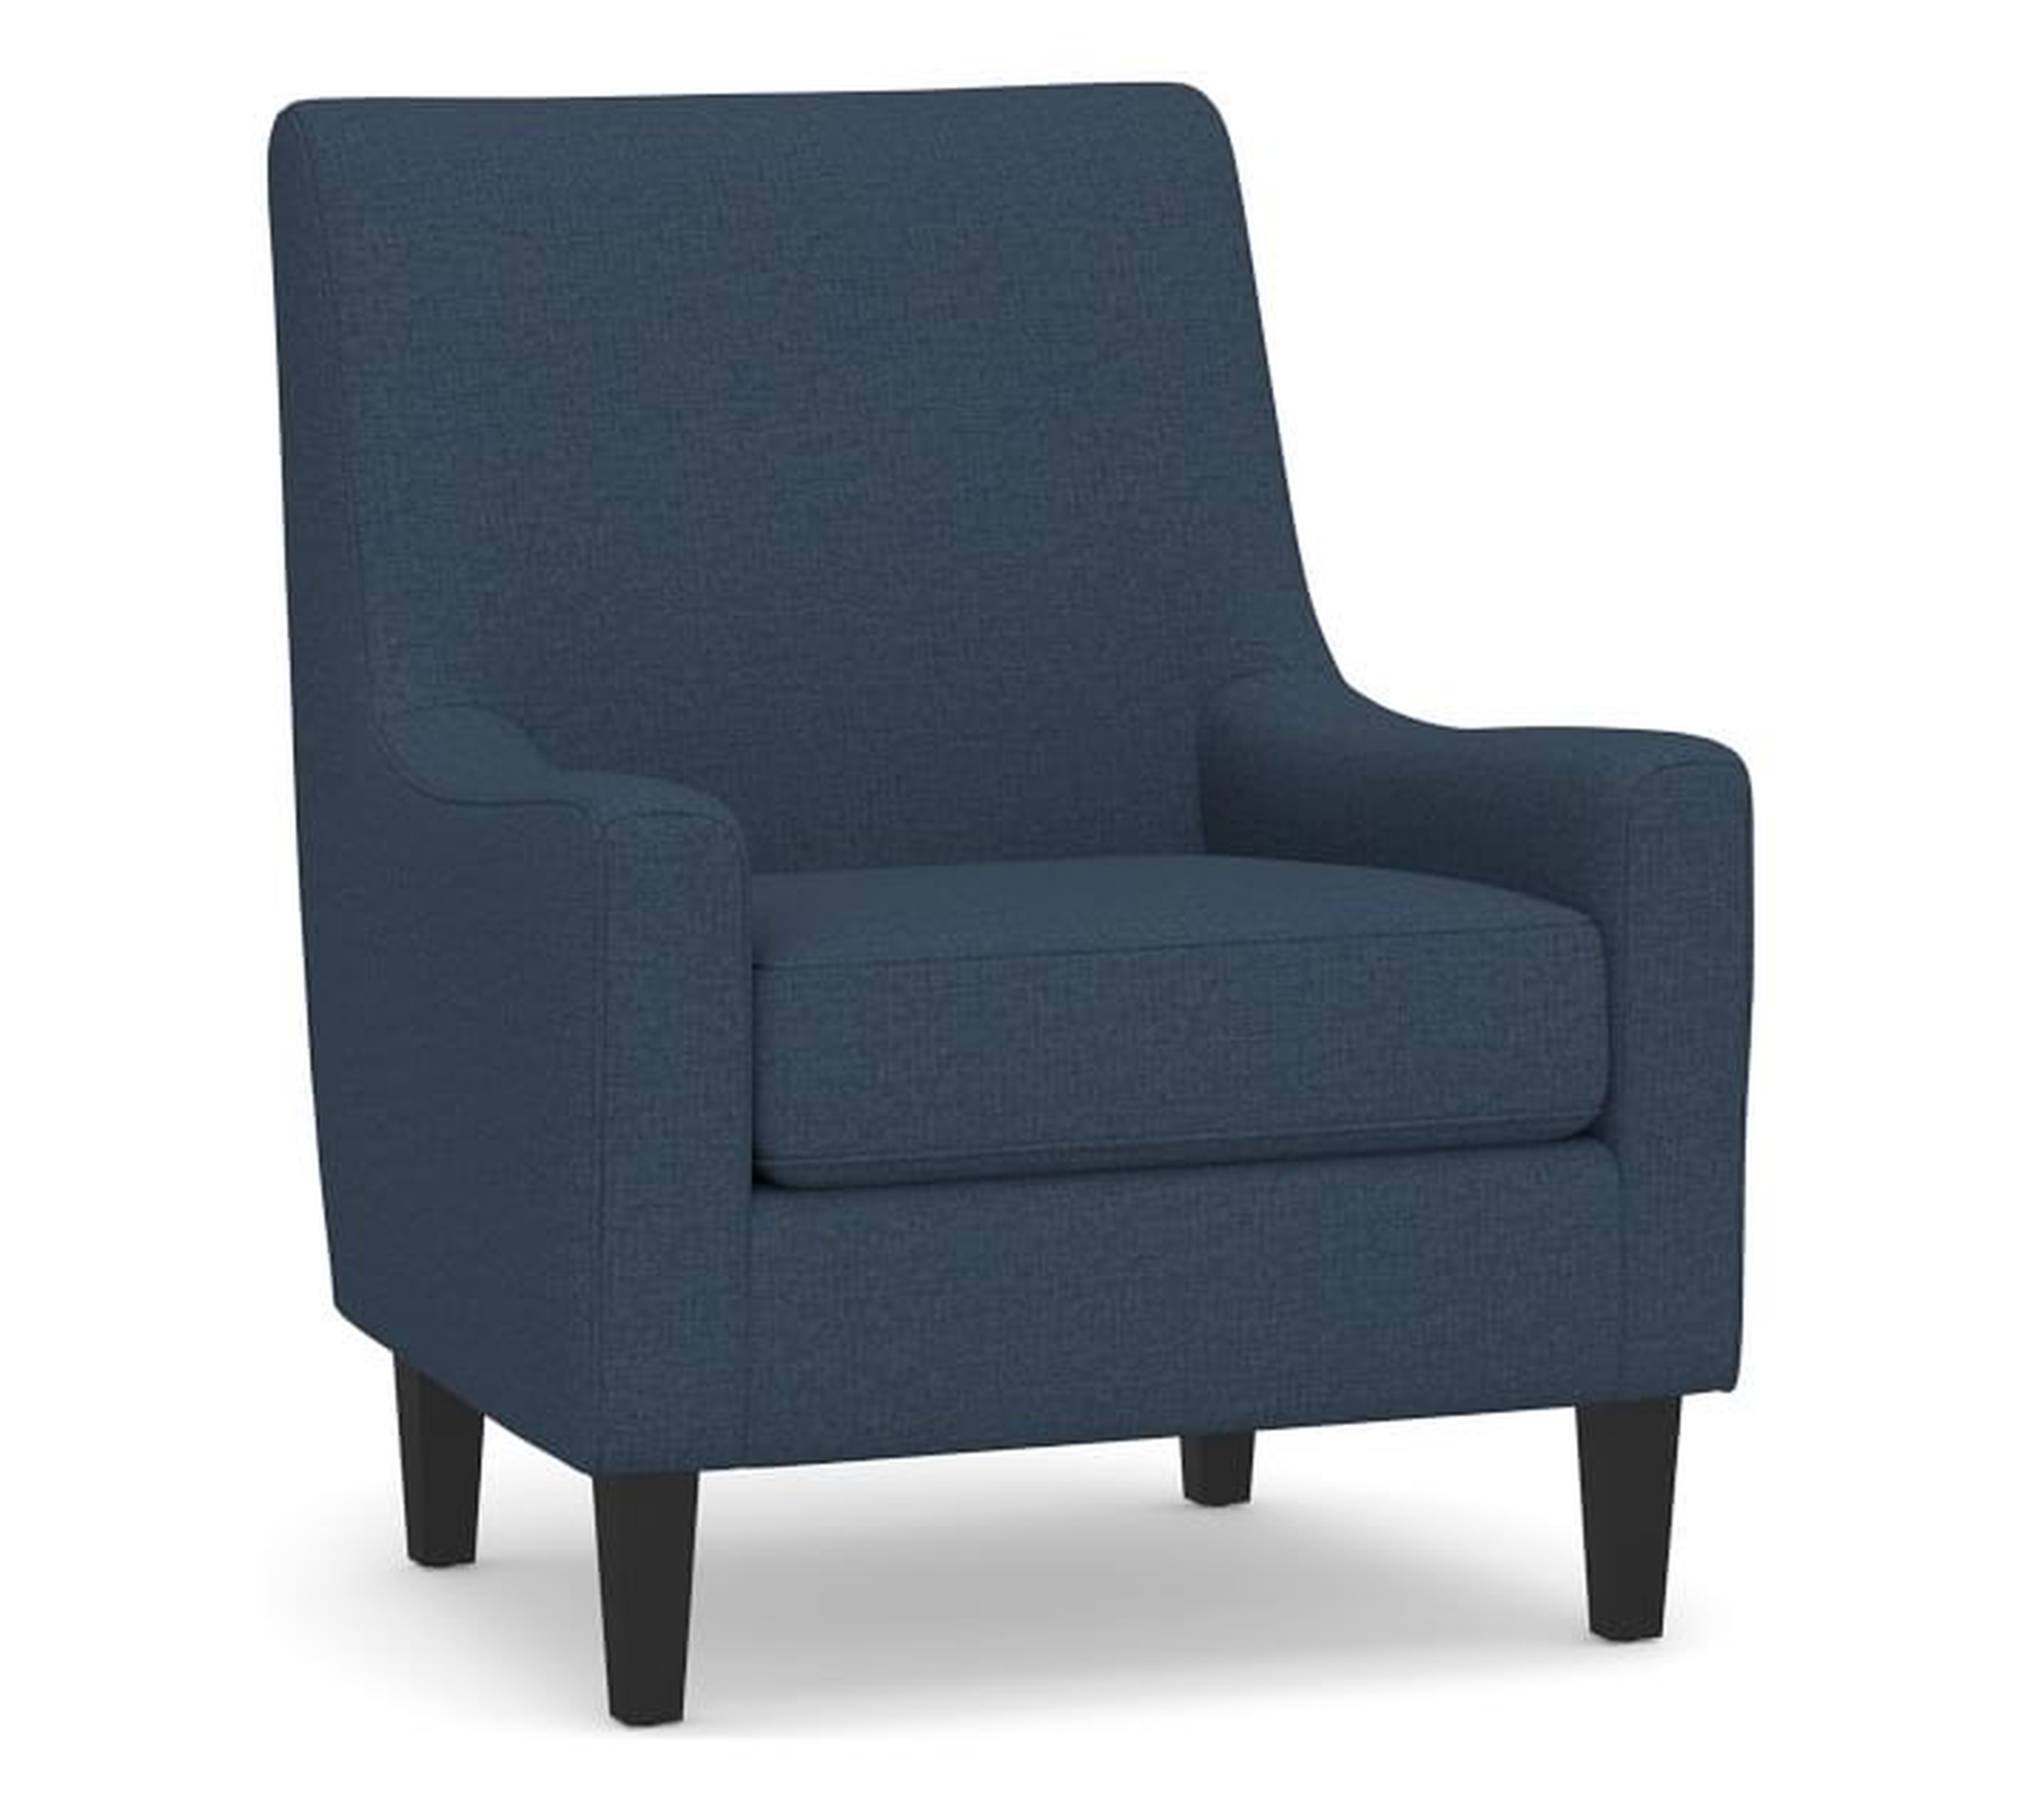 SoMa Isaac Upholstered Armchair, Polyester Wrapped Cushions, Brushed Crossweave Navy - Pottery Barn